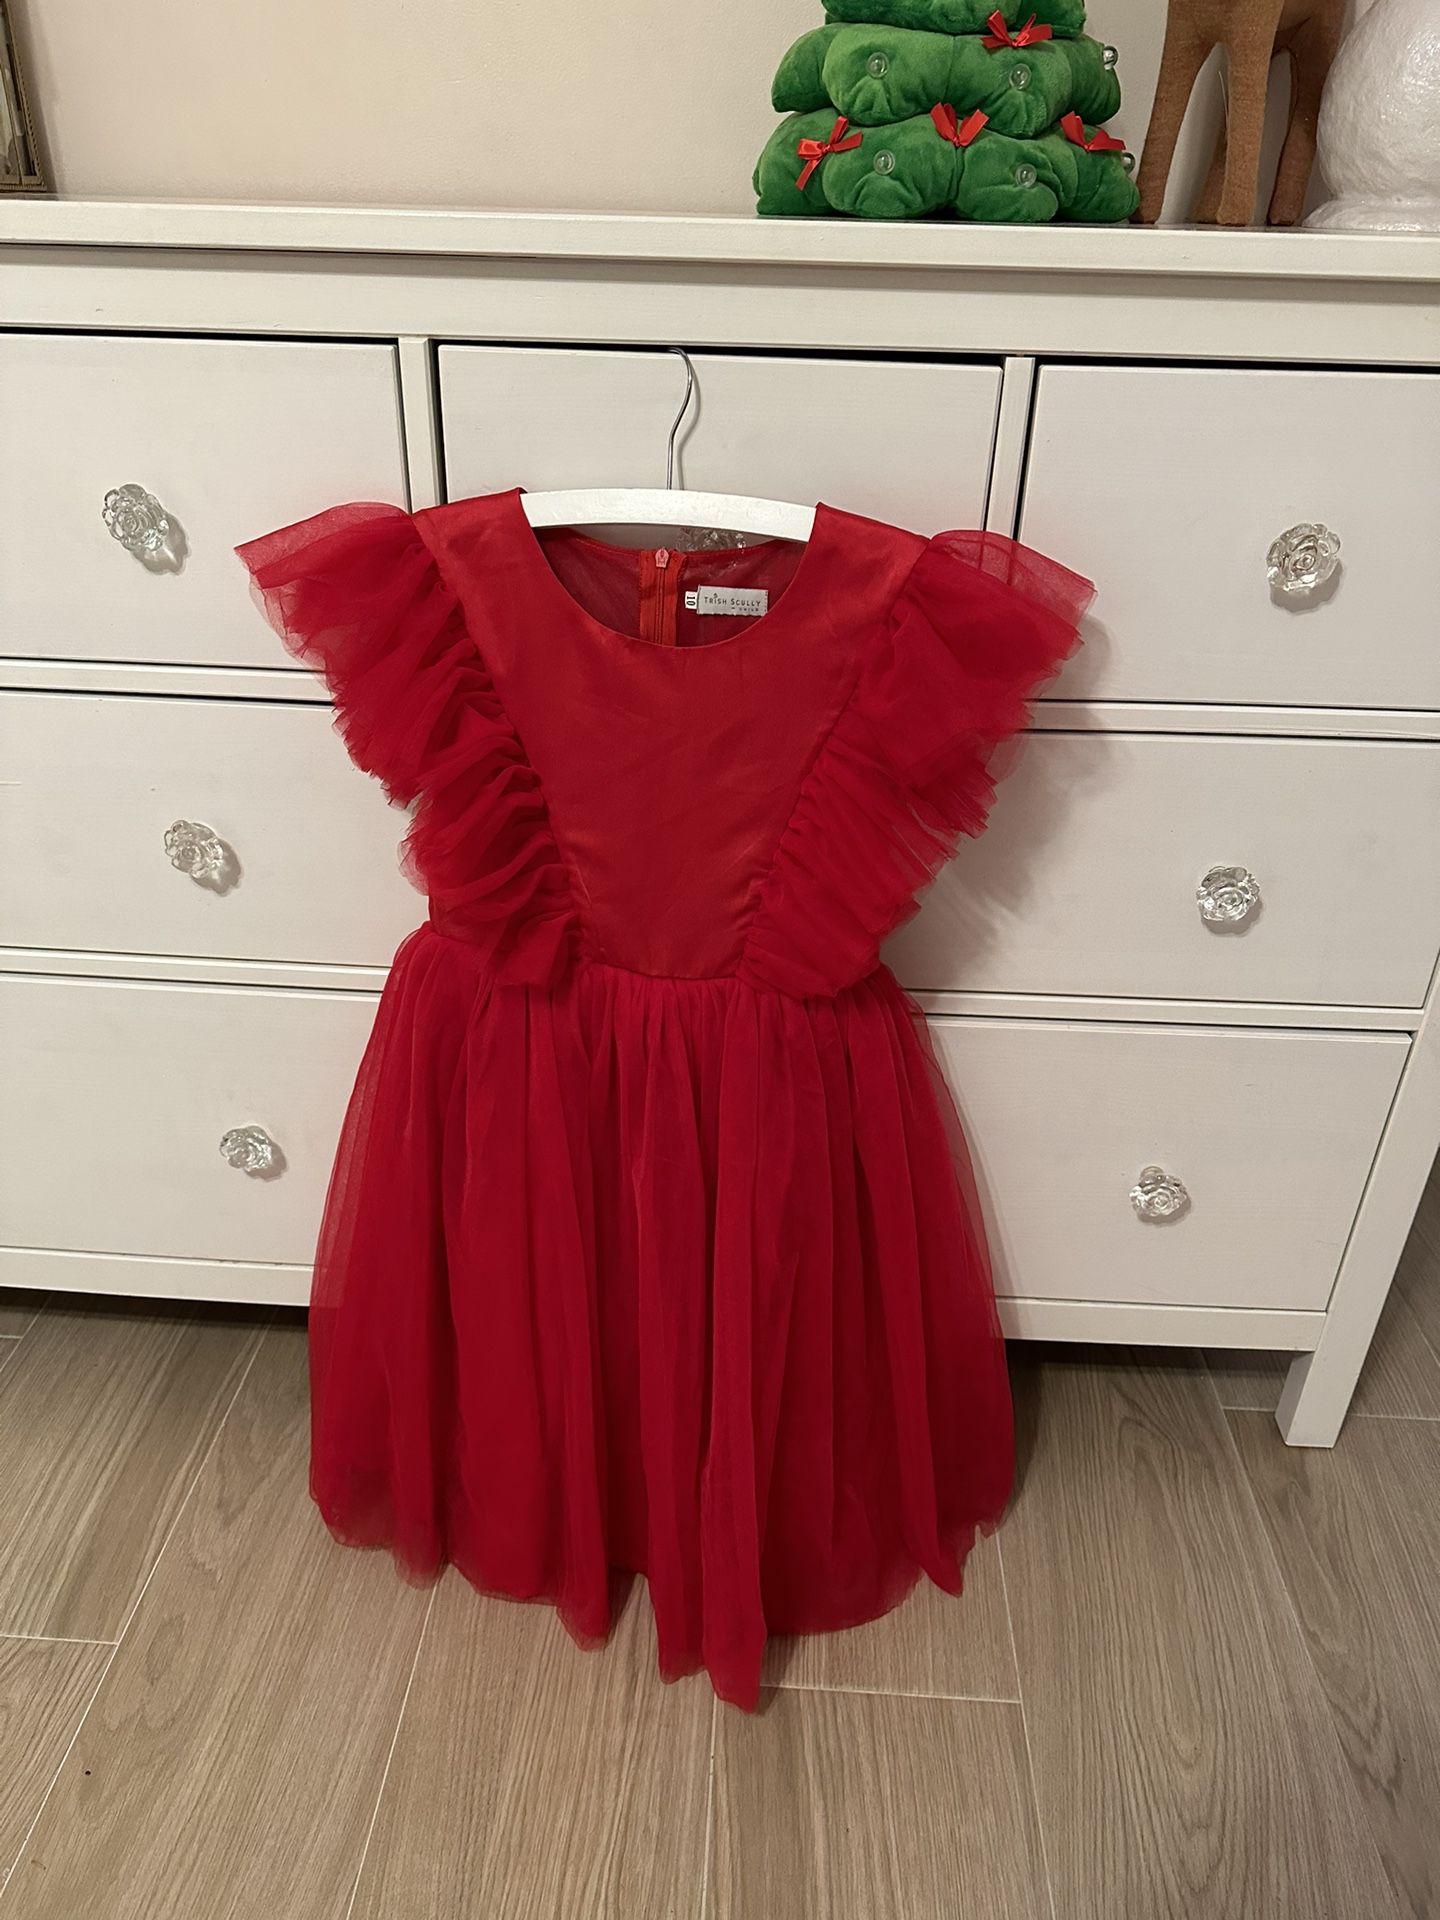 Girls Size 10 Trish Scully Dress for Sale in Fort Lauderdale, FL - OfferUp